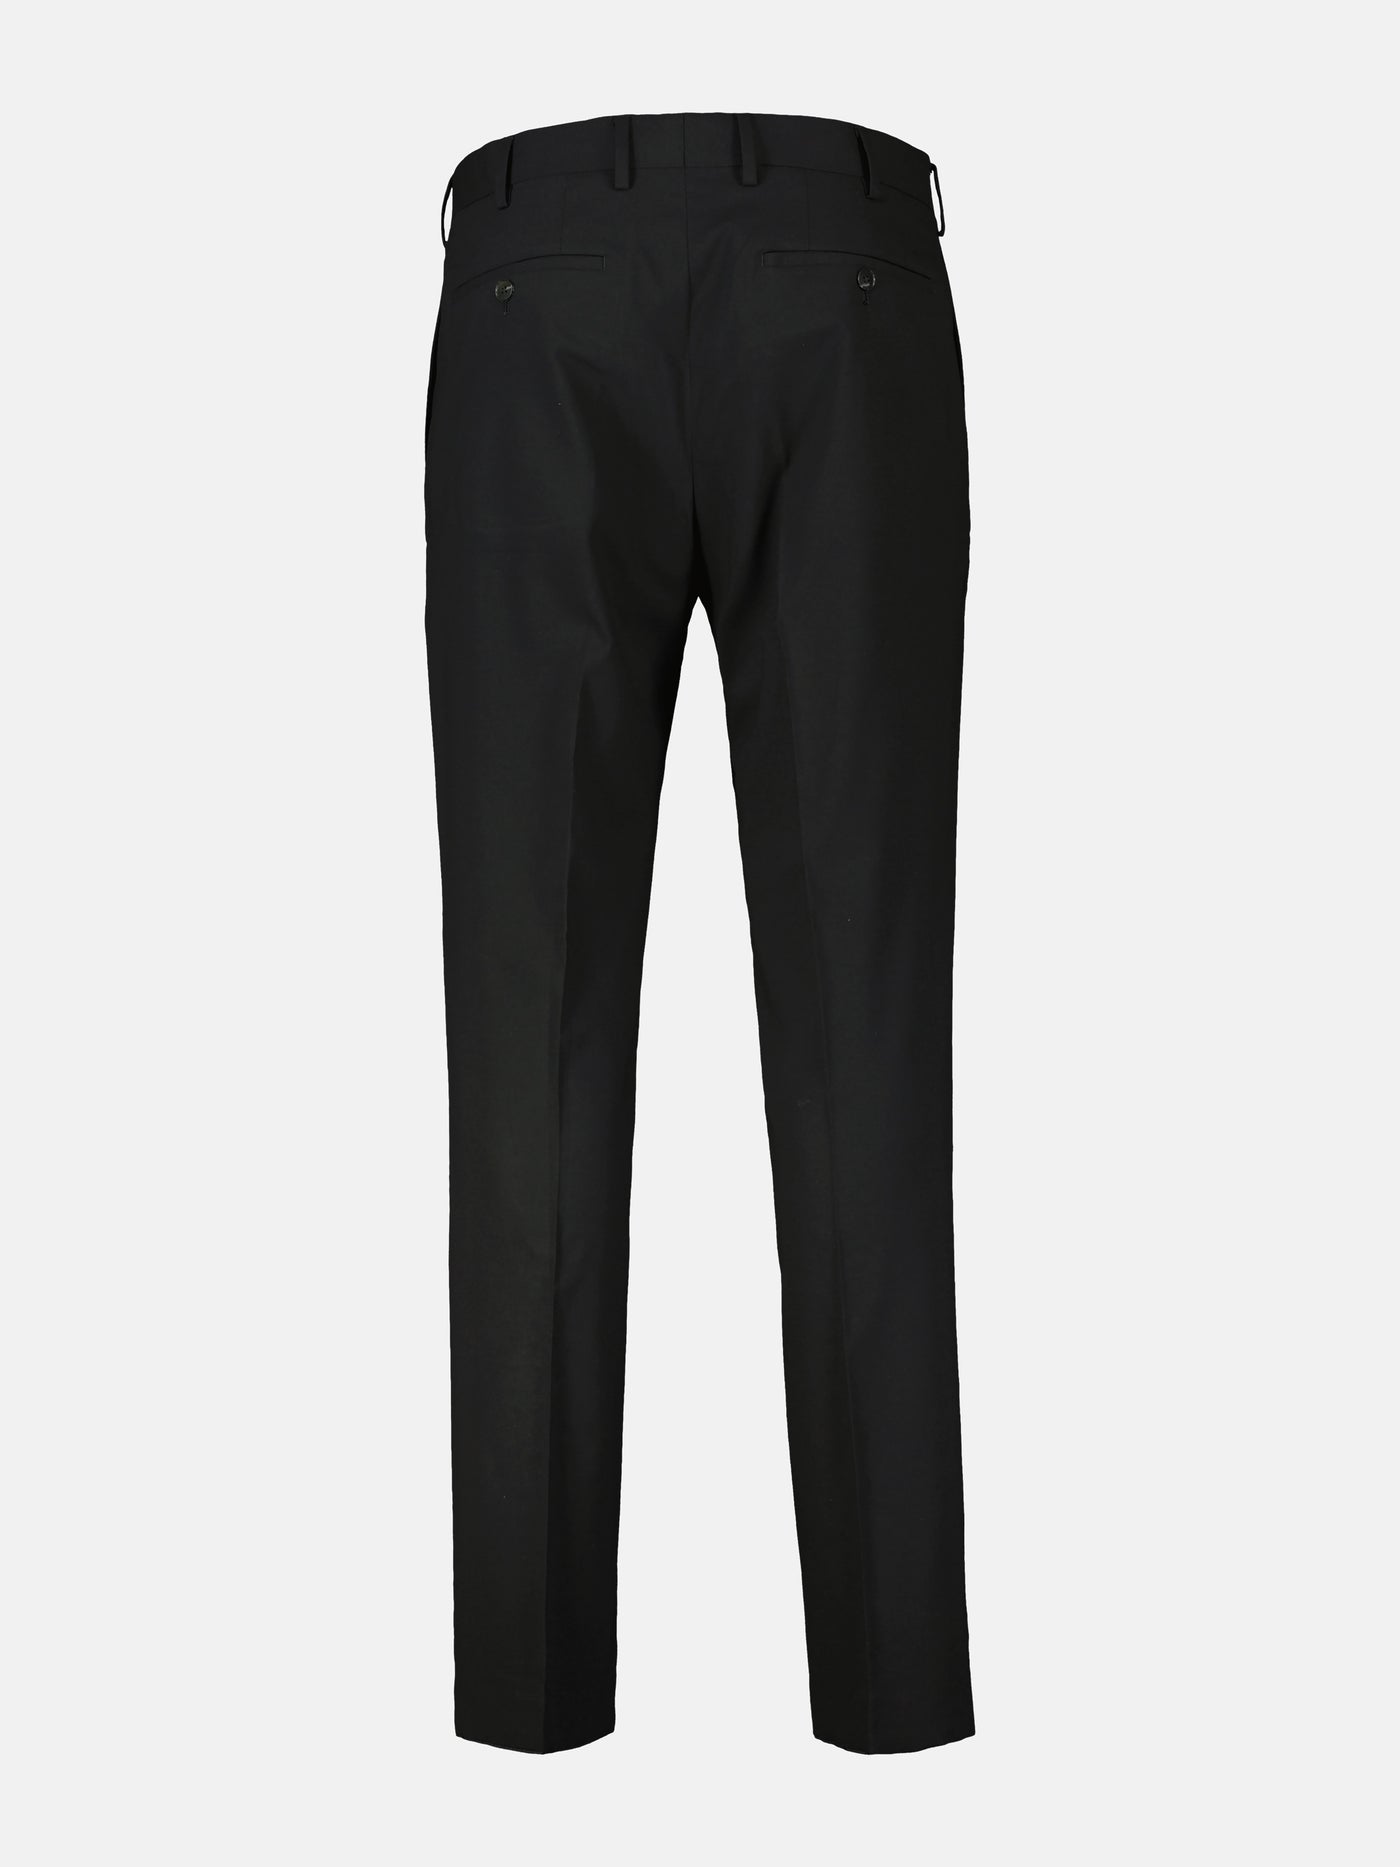 Men's suit trousers with stretch, straight cut